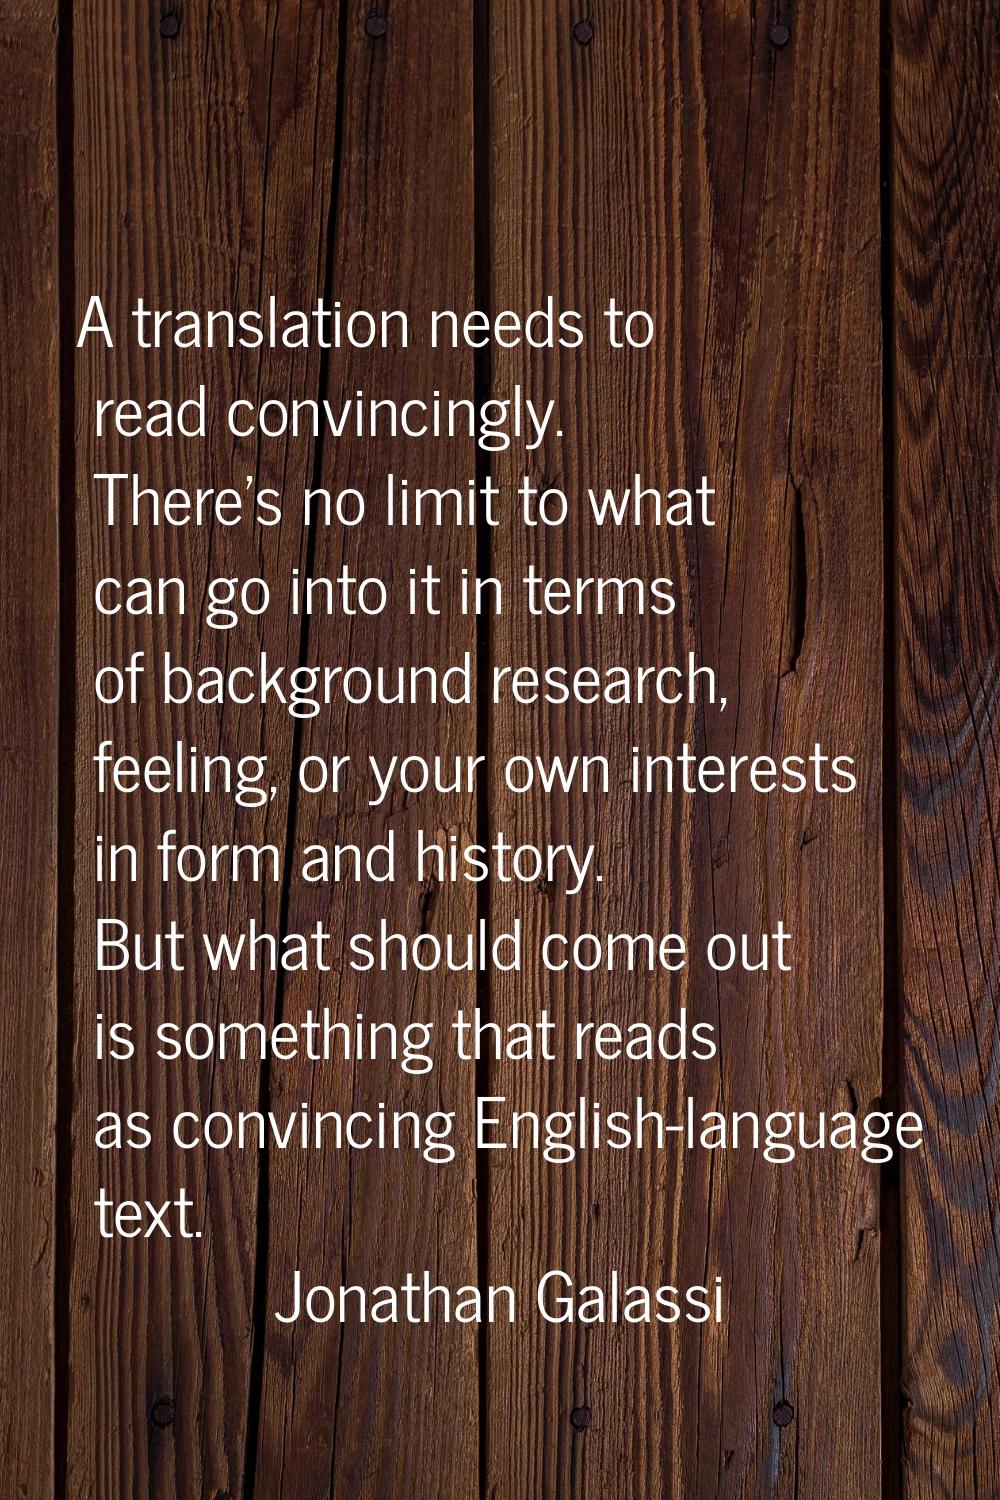 A translation needs to read convincingly. There's no limit to what can go into it in terms of backg